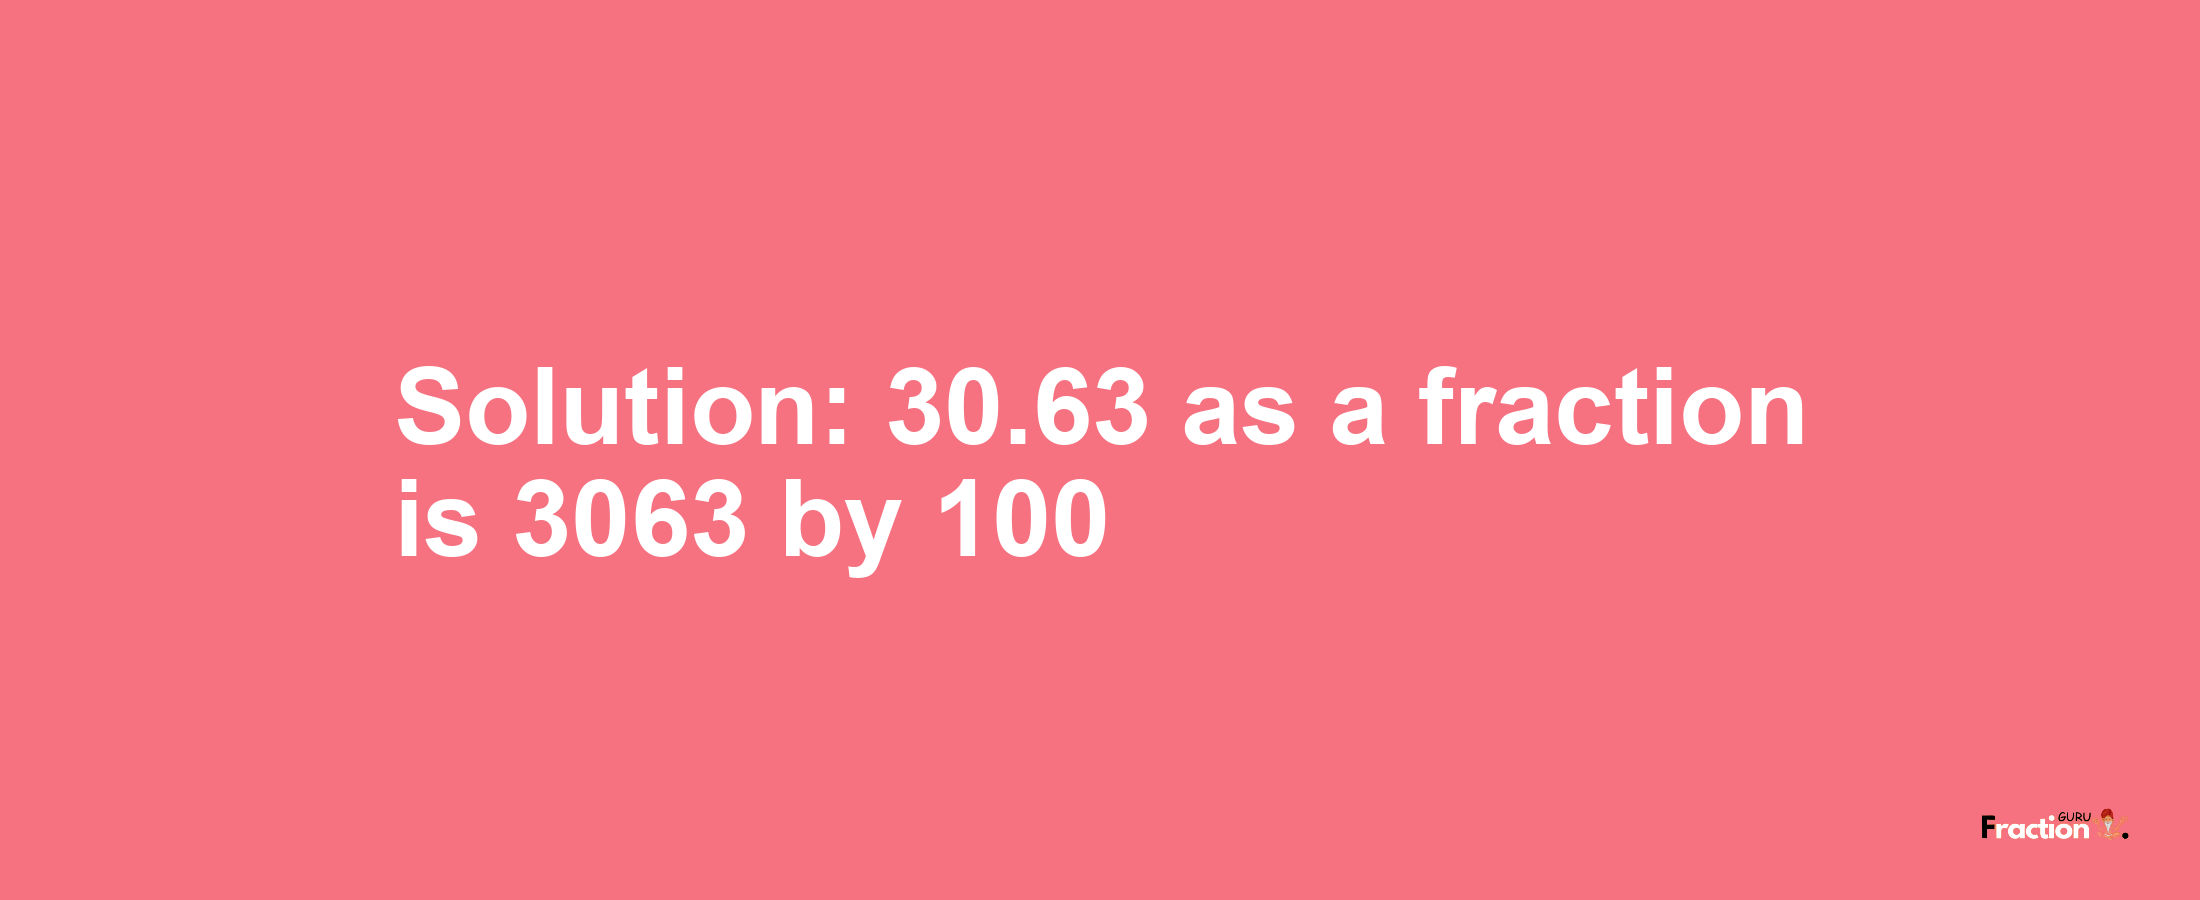 Solution:30.63 as a fraction is 3063/100